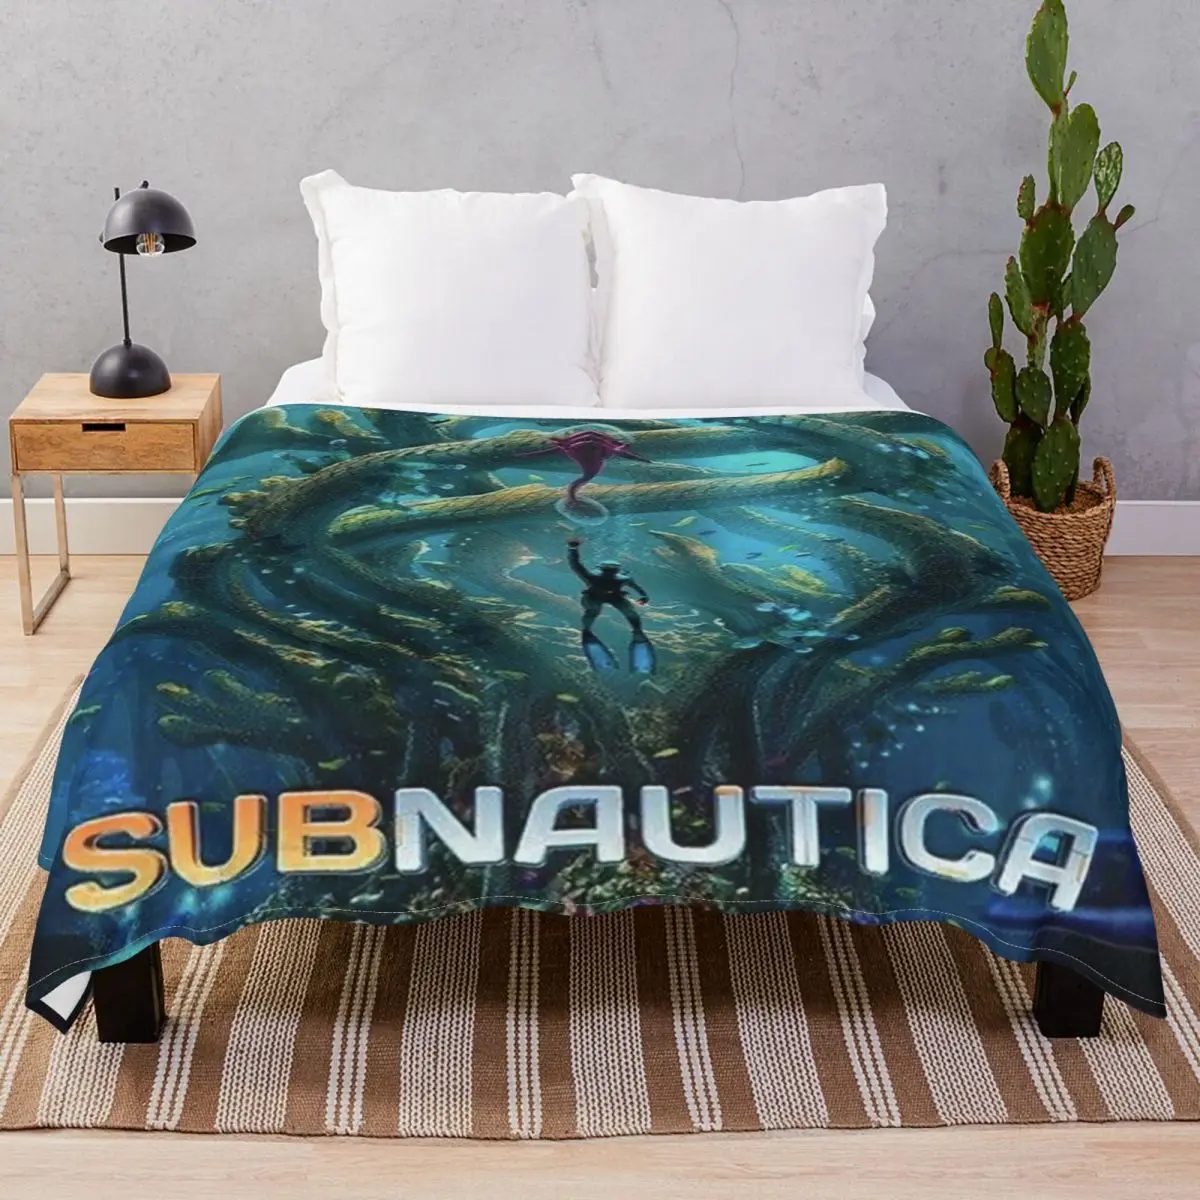 

SUBNAUTICA Blanket Flannel Summer Warm Throw Blankets for Bed Sofa Camp Office